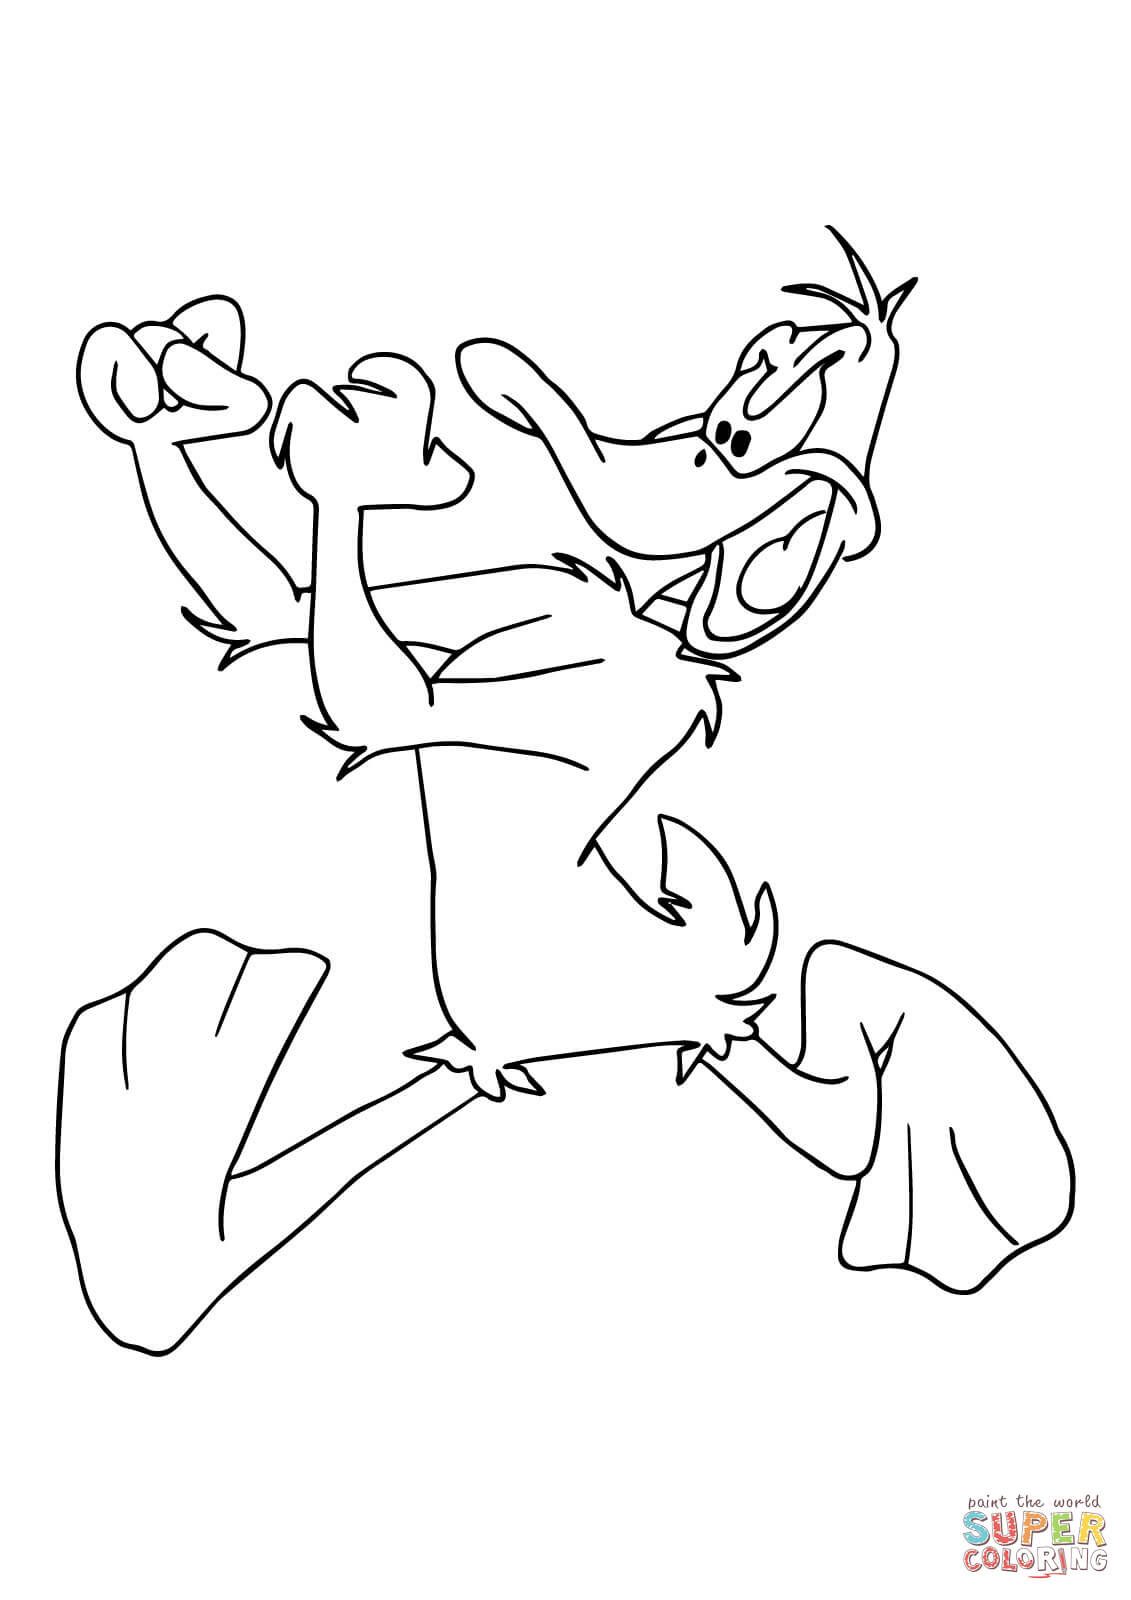 Download 213+ Bugs Bunny And Daffy Duck Coloring Pages PNG PDF File ...